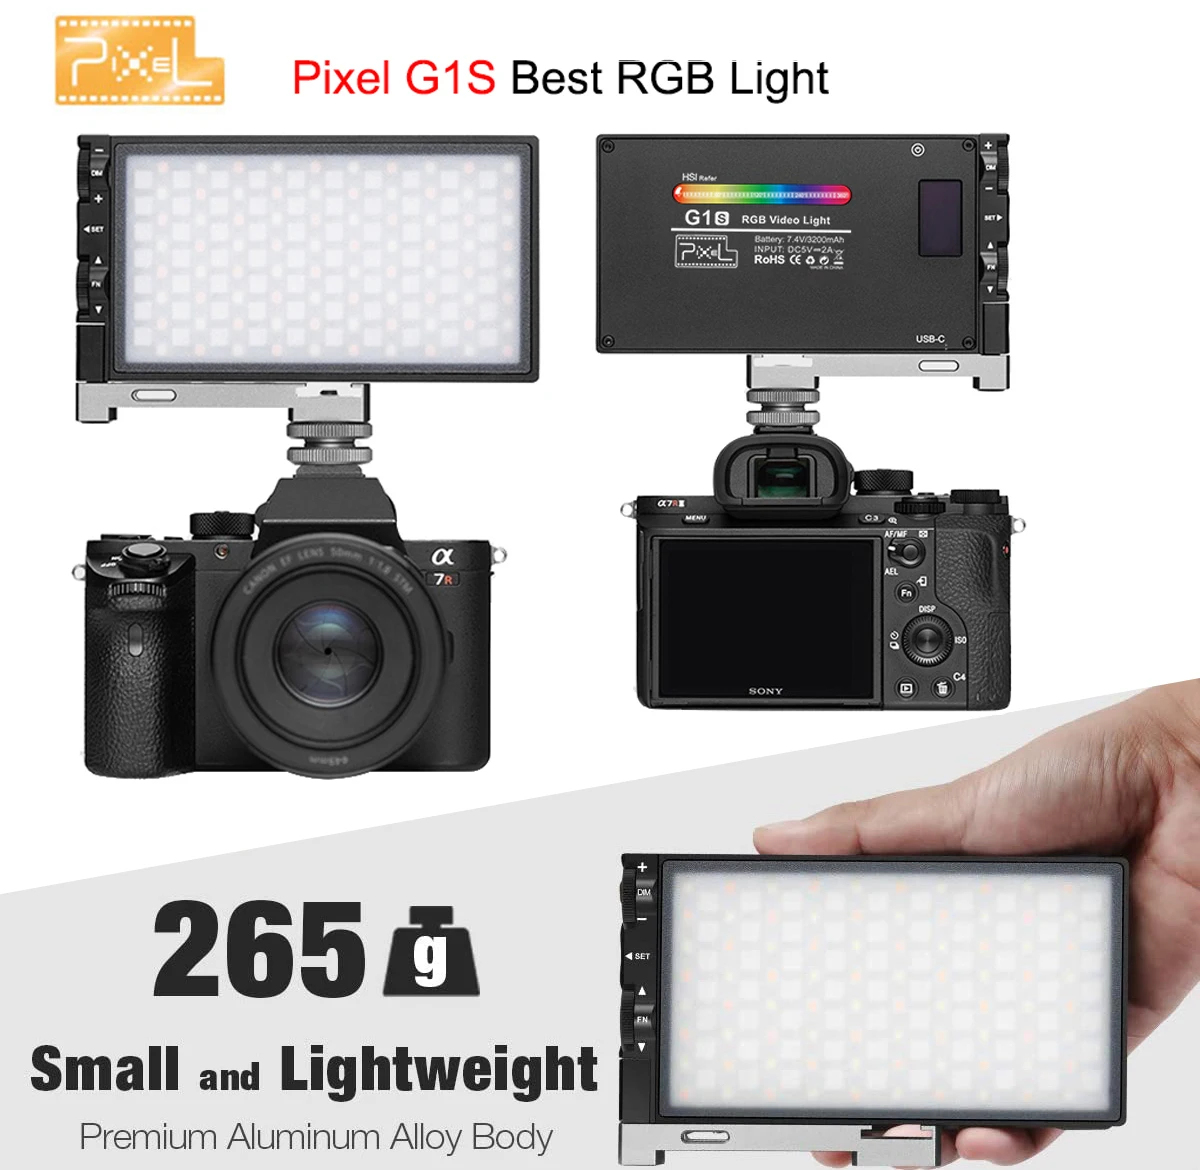 

Pixel G1s RGB Video Light Built-in 12W Rechargeable Battery LED Camera Light 360° Full Color 12 Common Light Effects Lamp